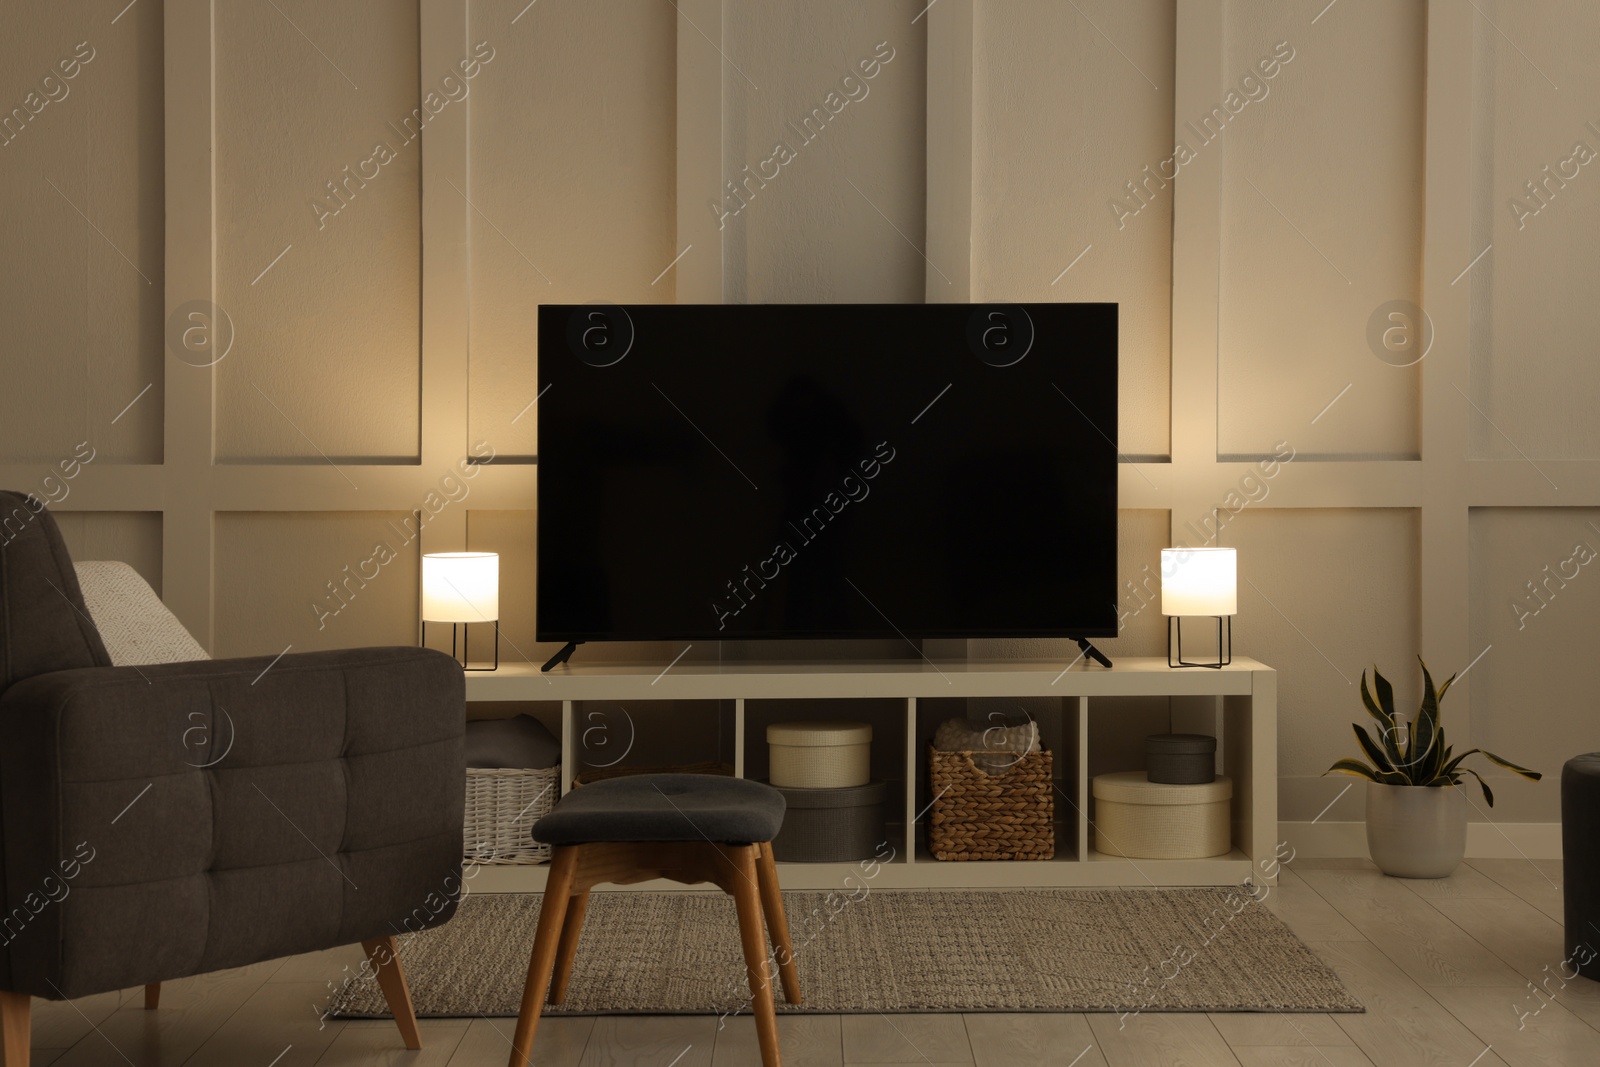 Photo of Modern TV on cabinet, armchair and lamps indoors. Interior design